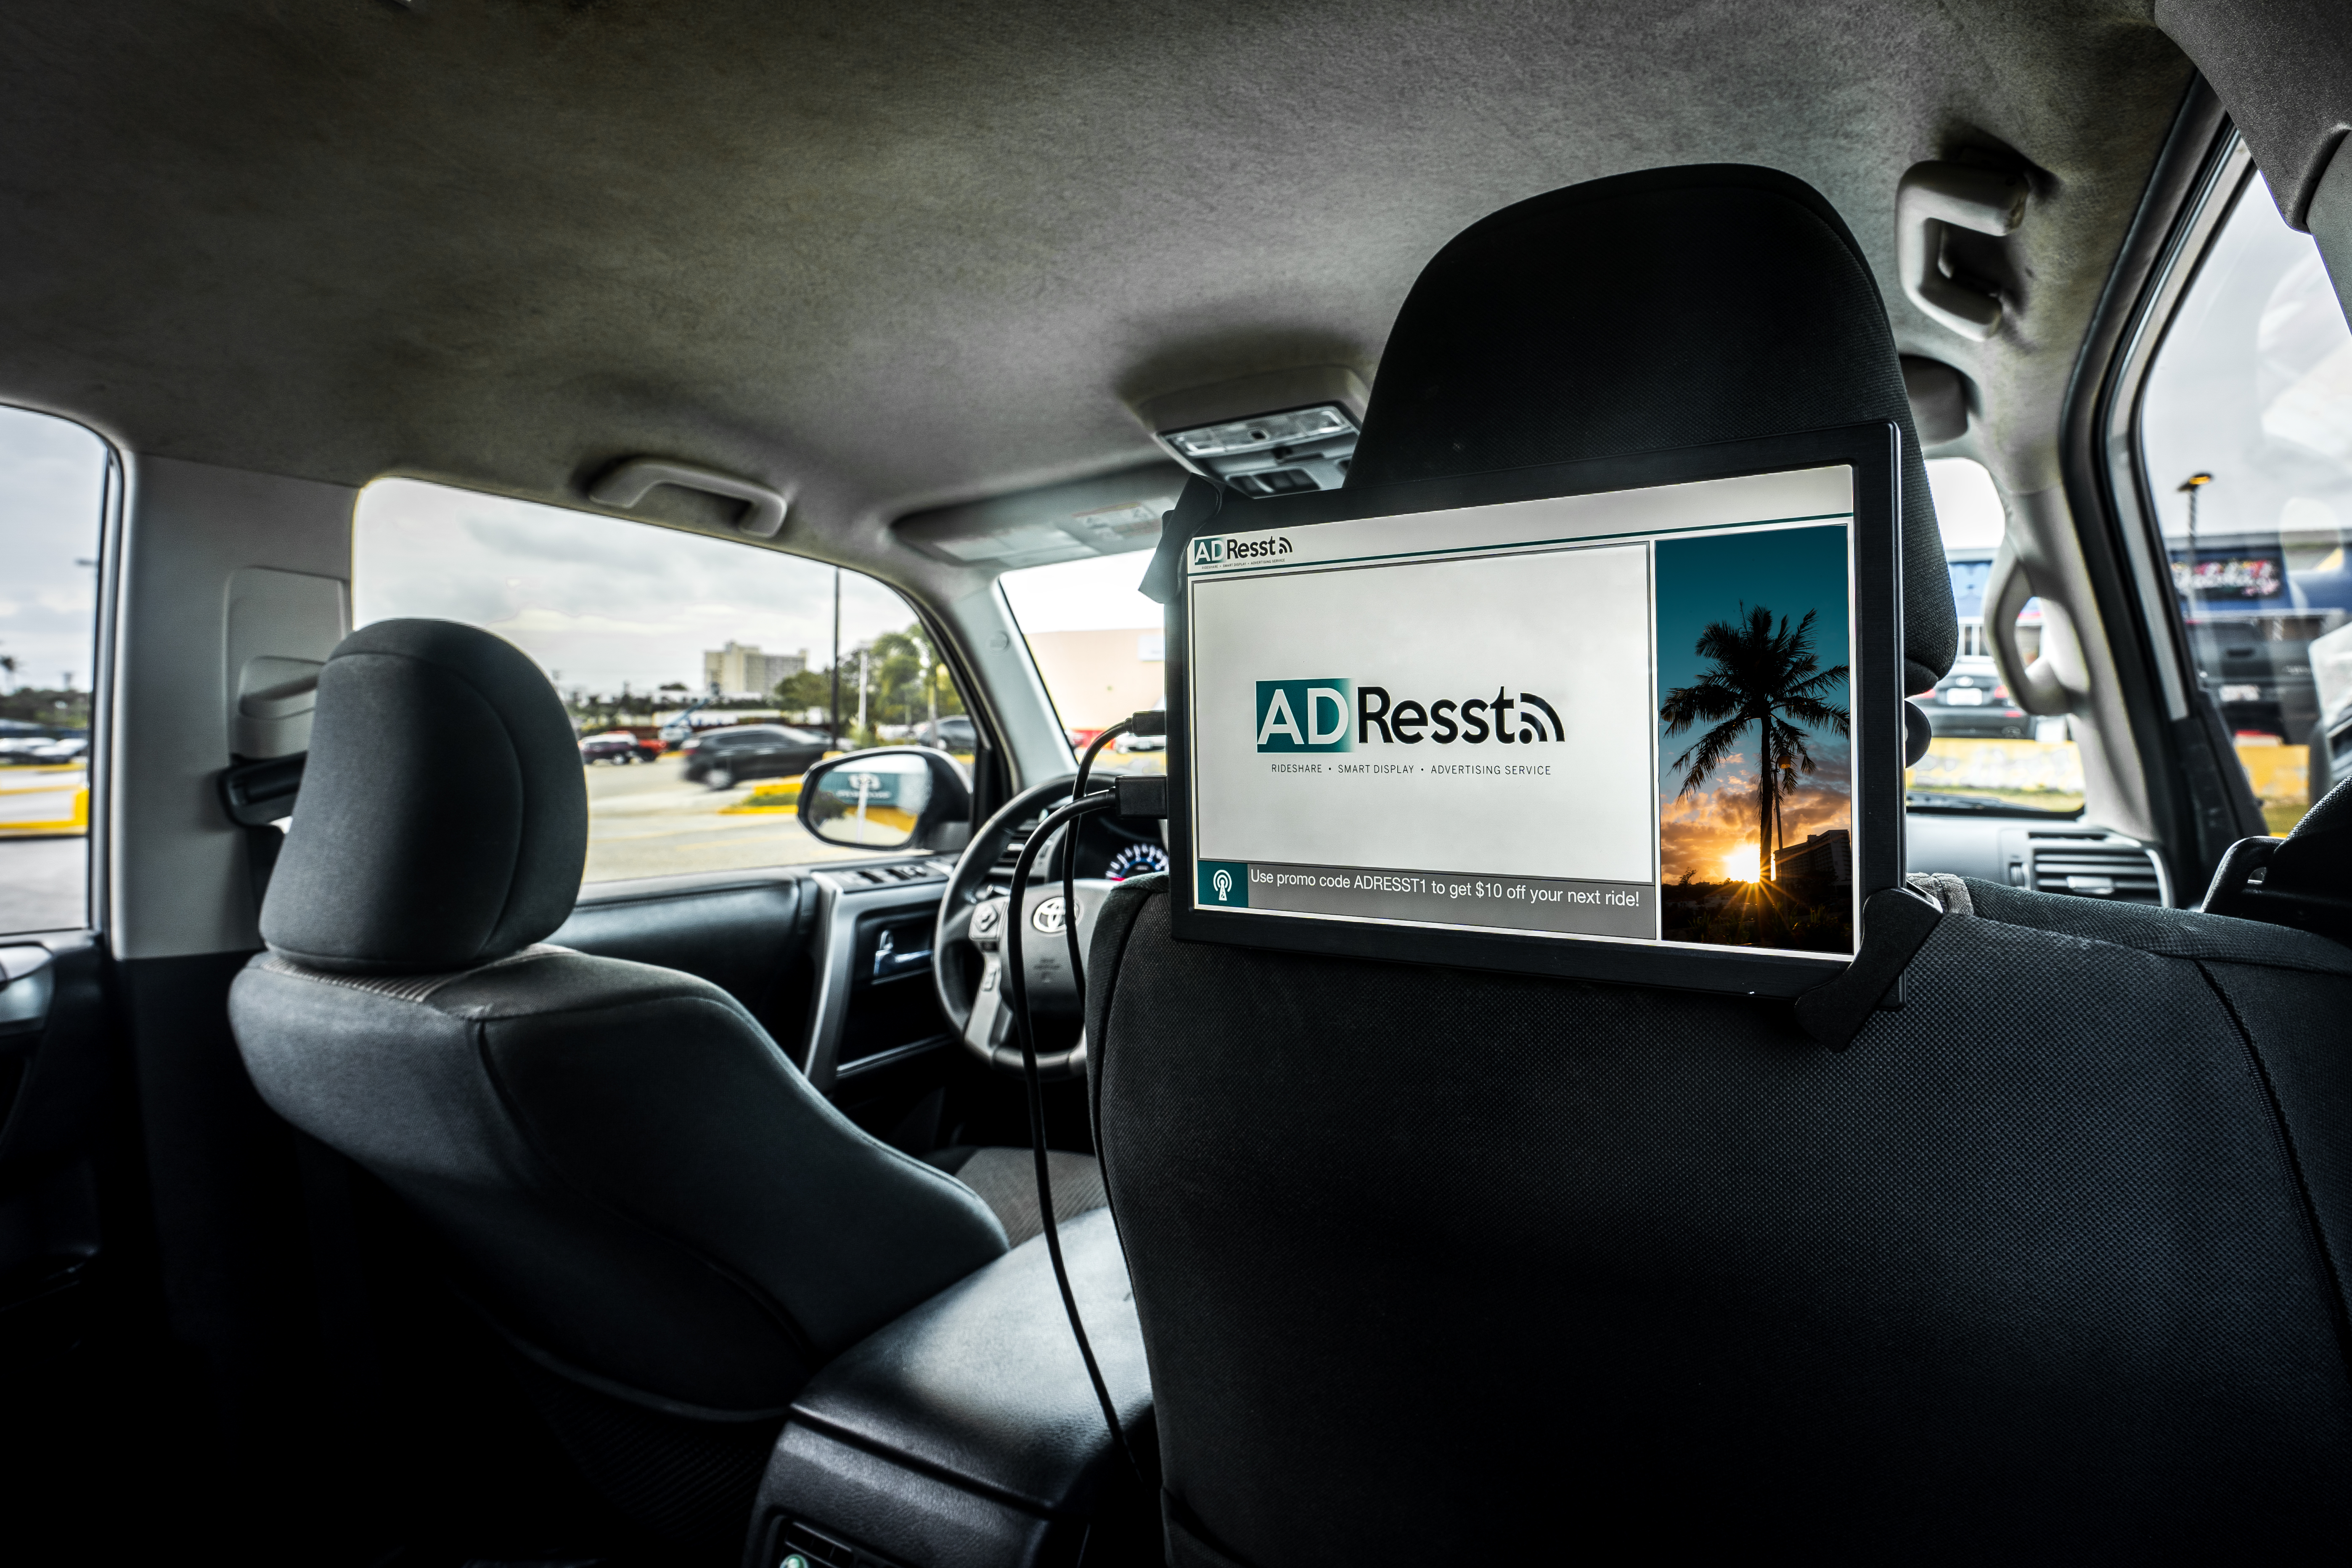 AdResst Set To Disrupt The Ride-sharing Industry With Their Innovative Advertising Platform